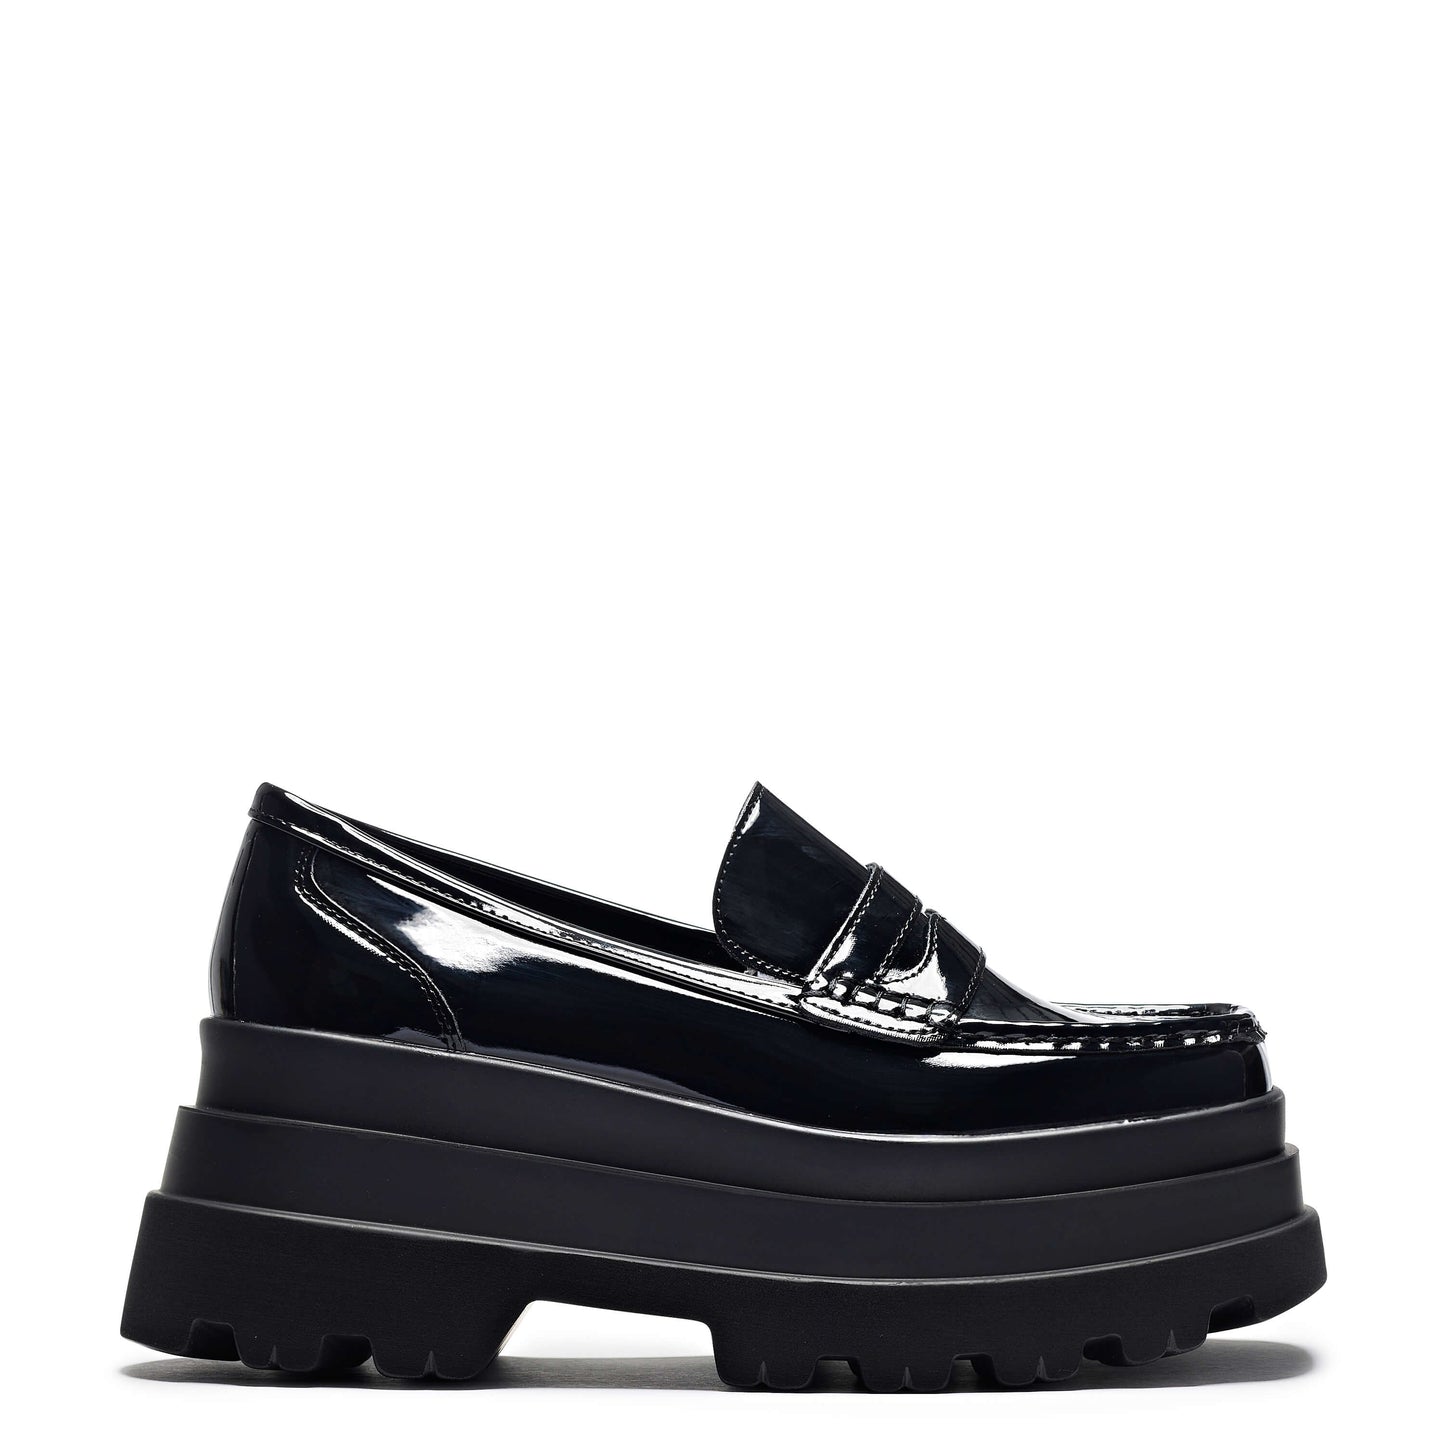 Arna Black Patent Trident Shoes - Shoes - KOI Footwear - Black - Side View